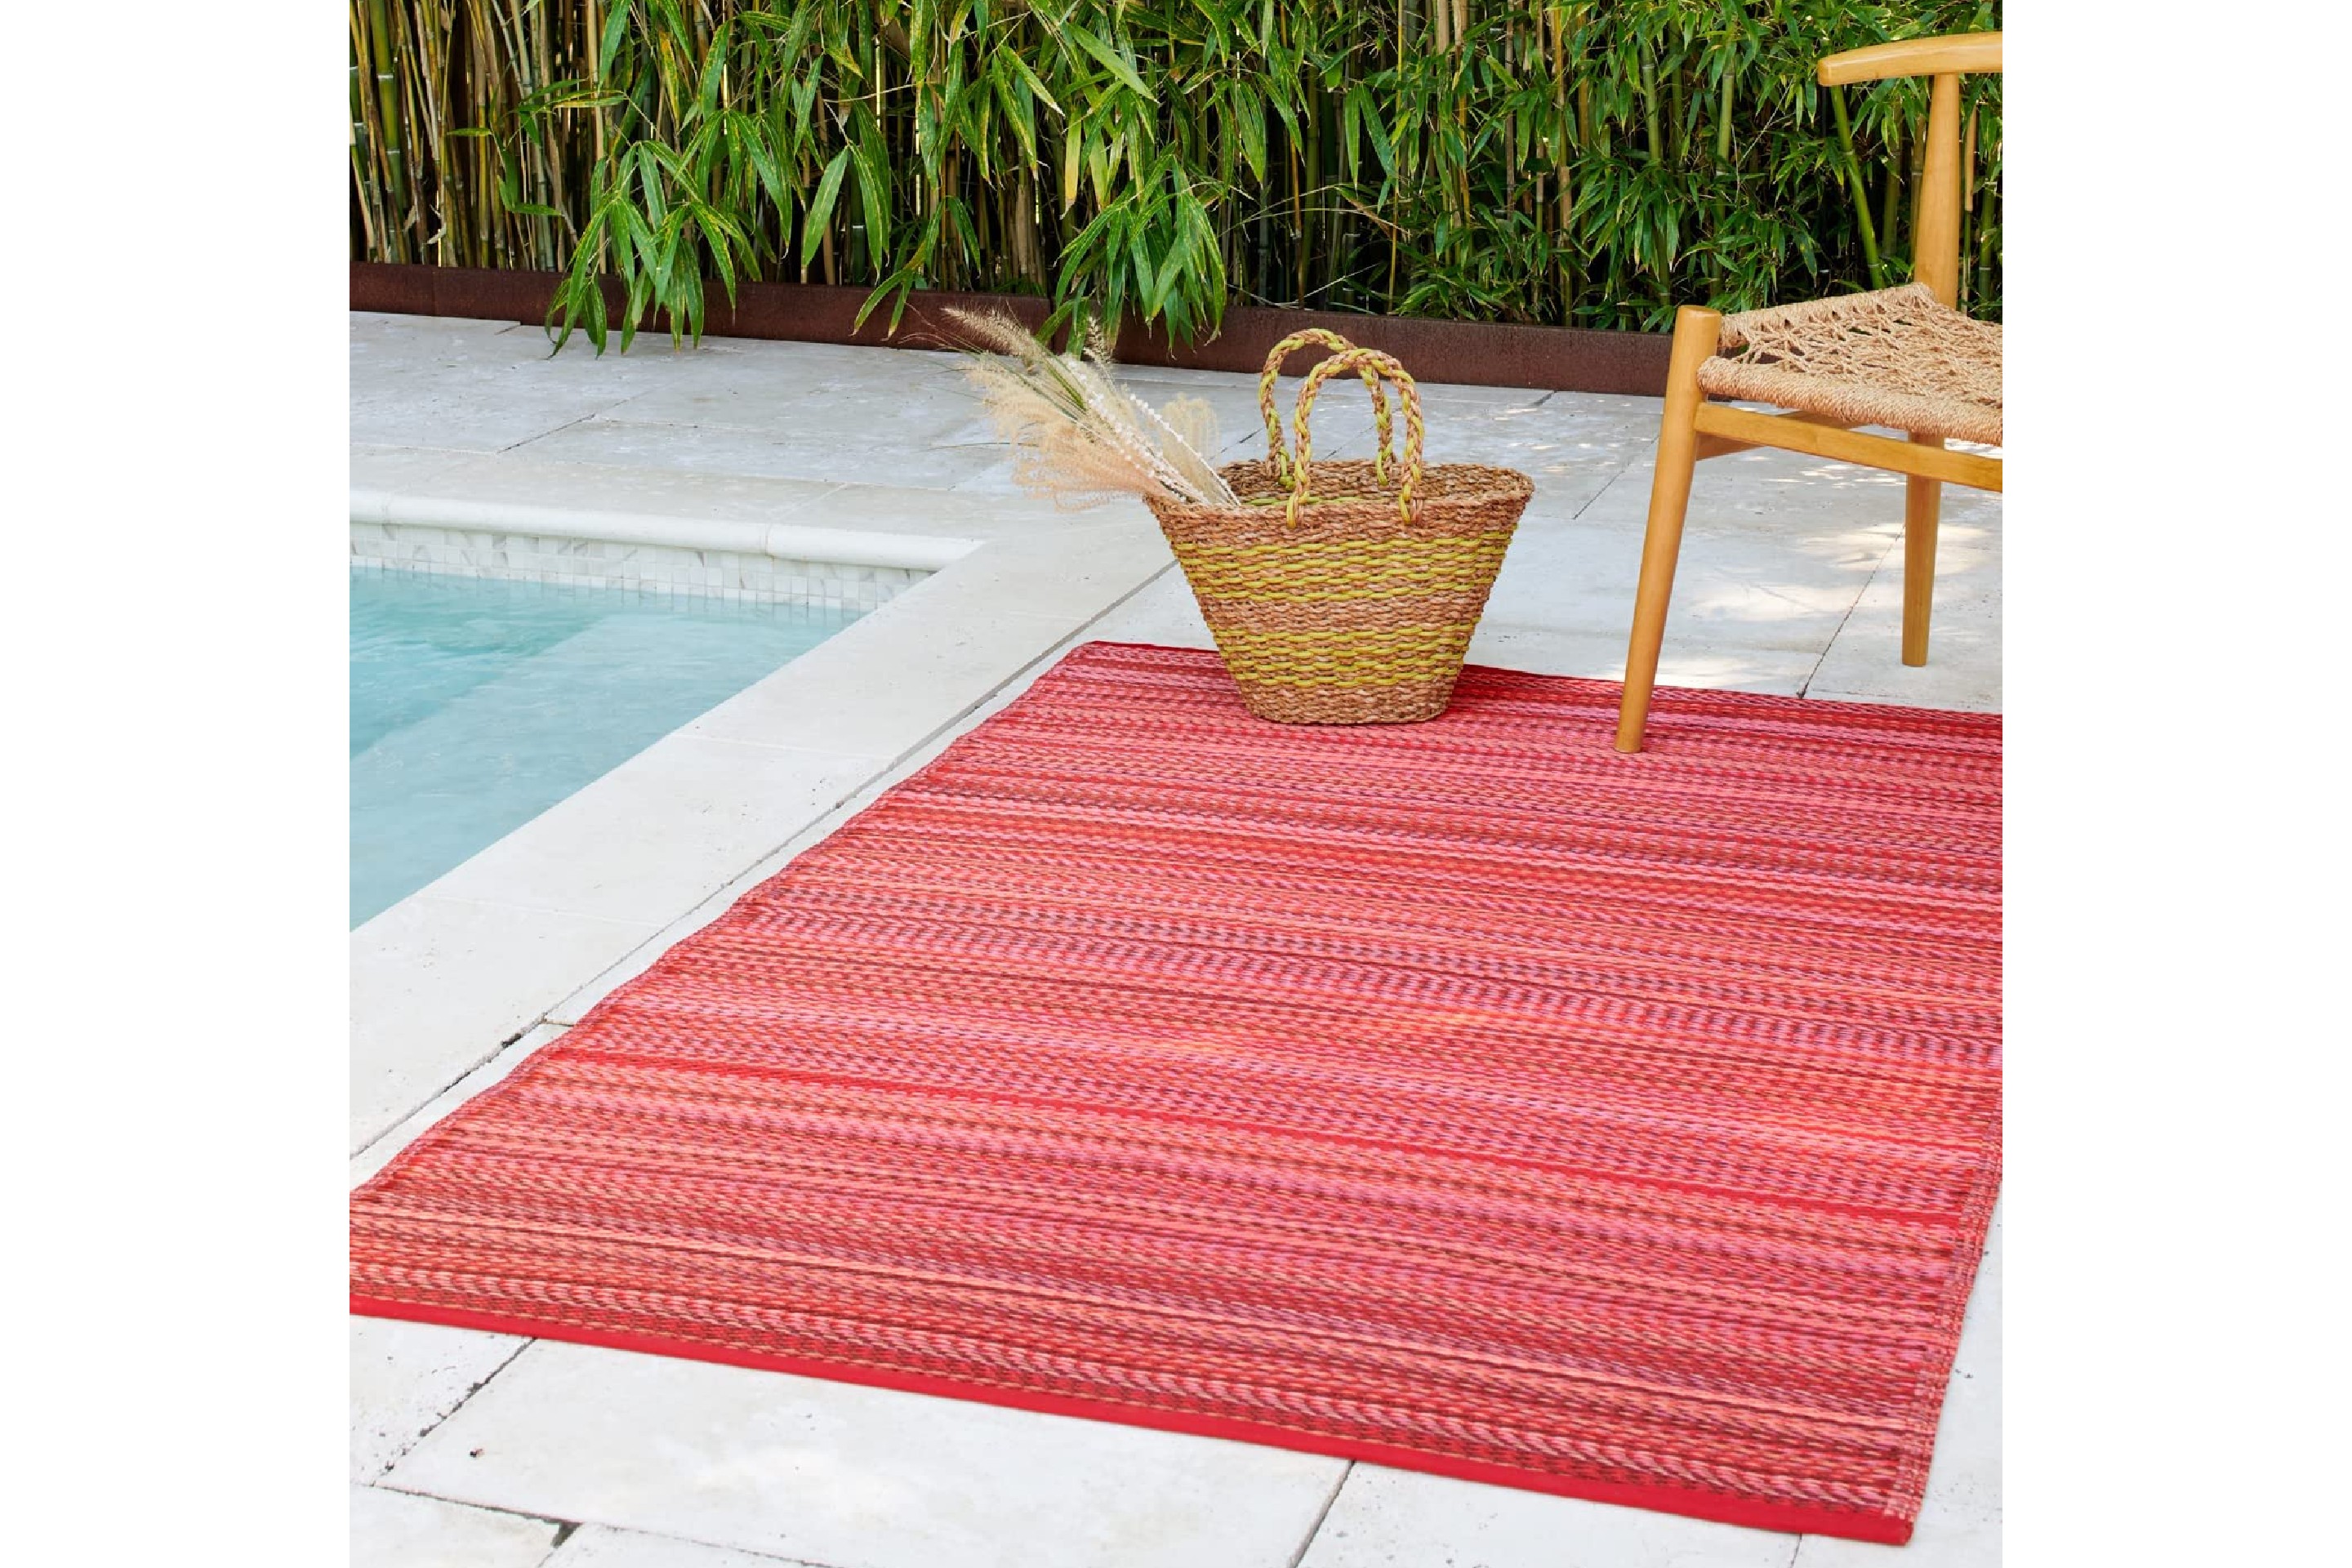 Finding the Best Outdoor Rug for Your Patio